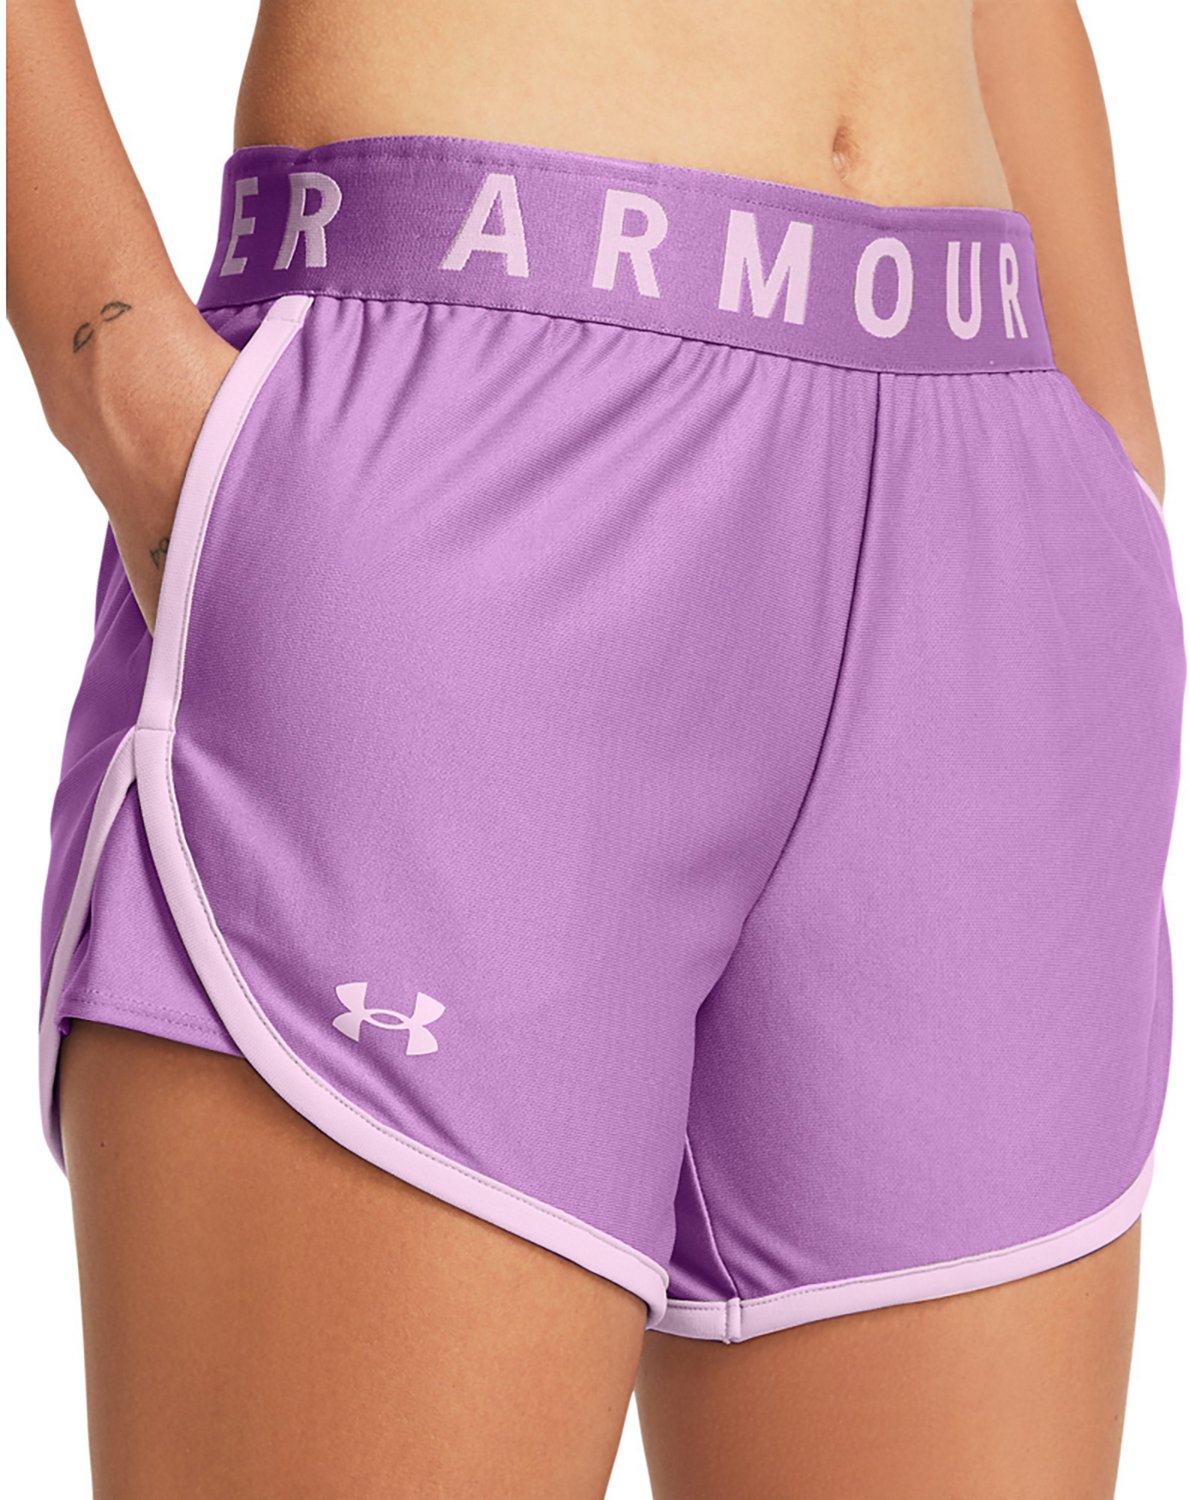 Under Armour Women's Play Up 5in Shorts                                                                                          - view number 3